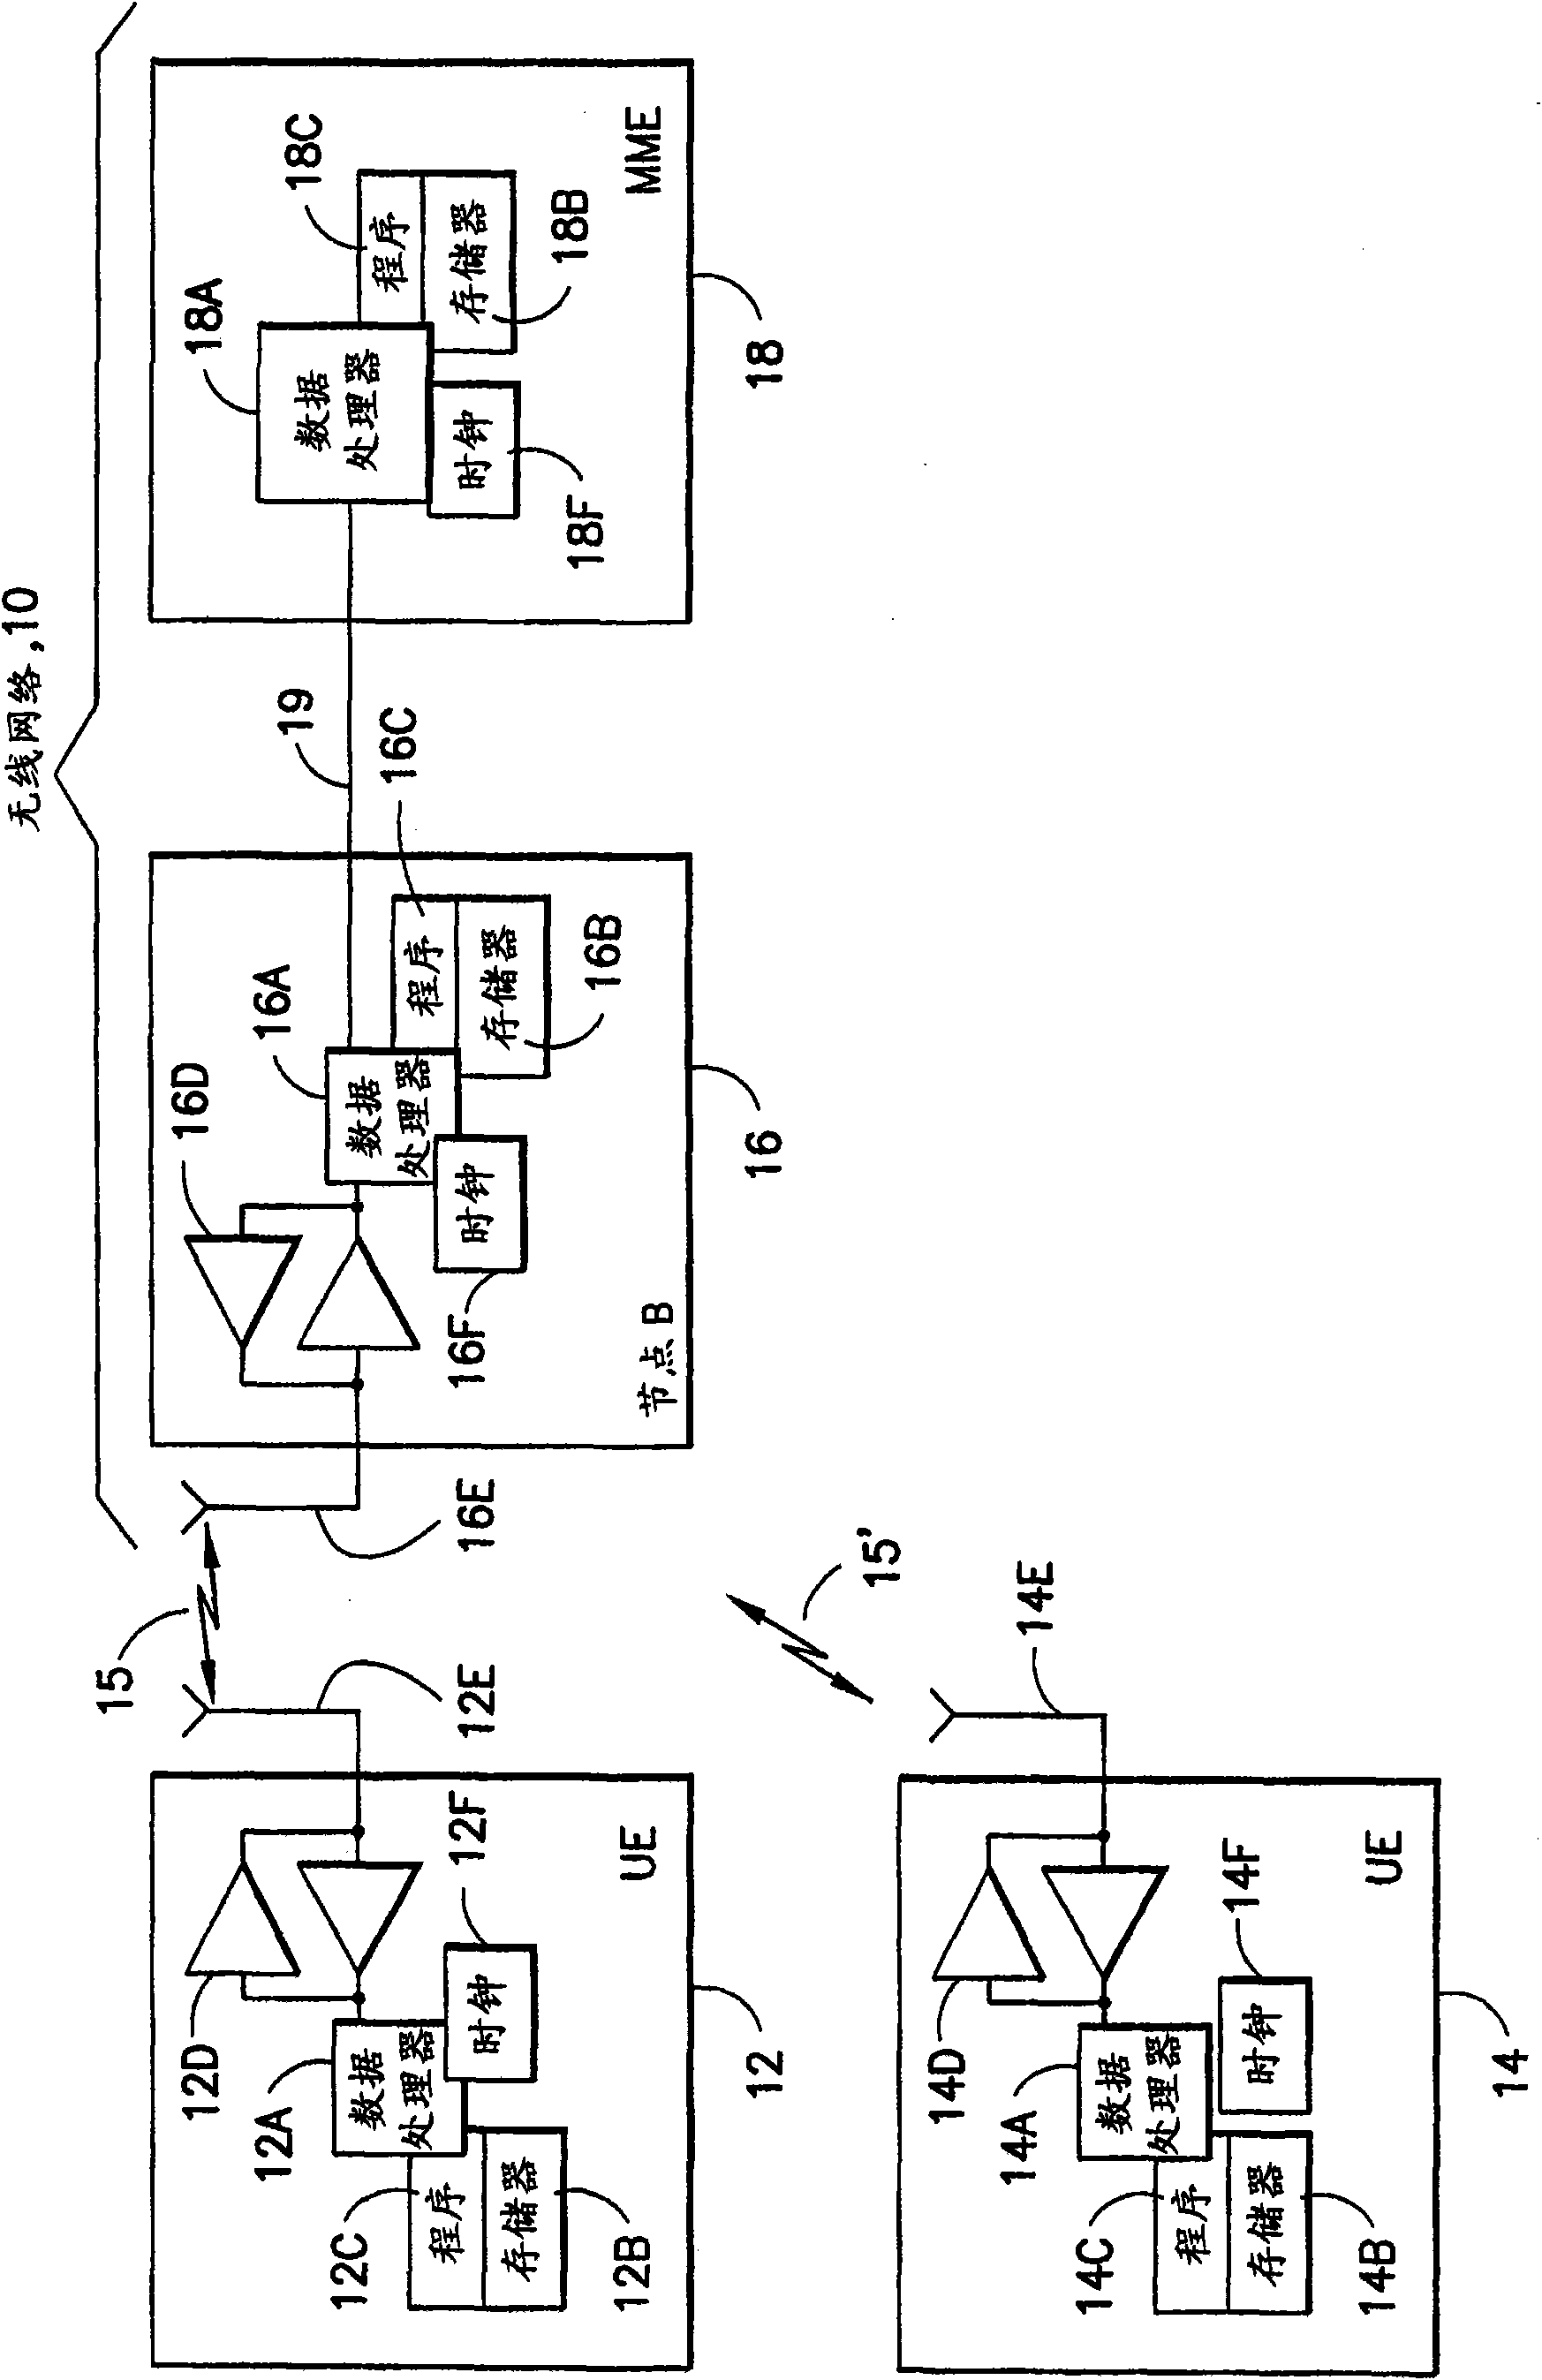 A method and apparatus for transmitter timing adjustment